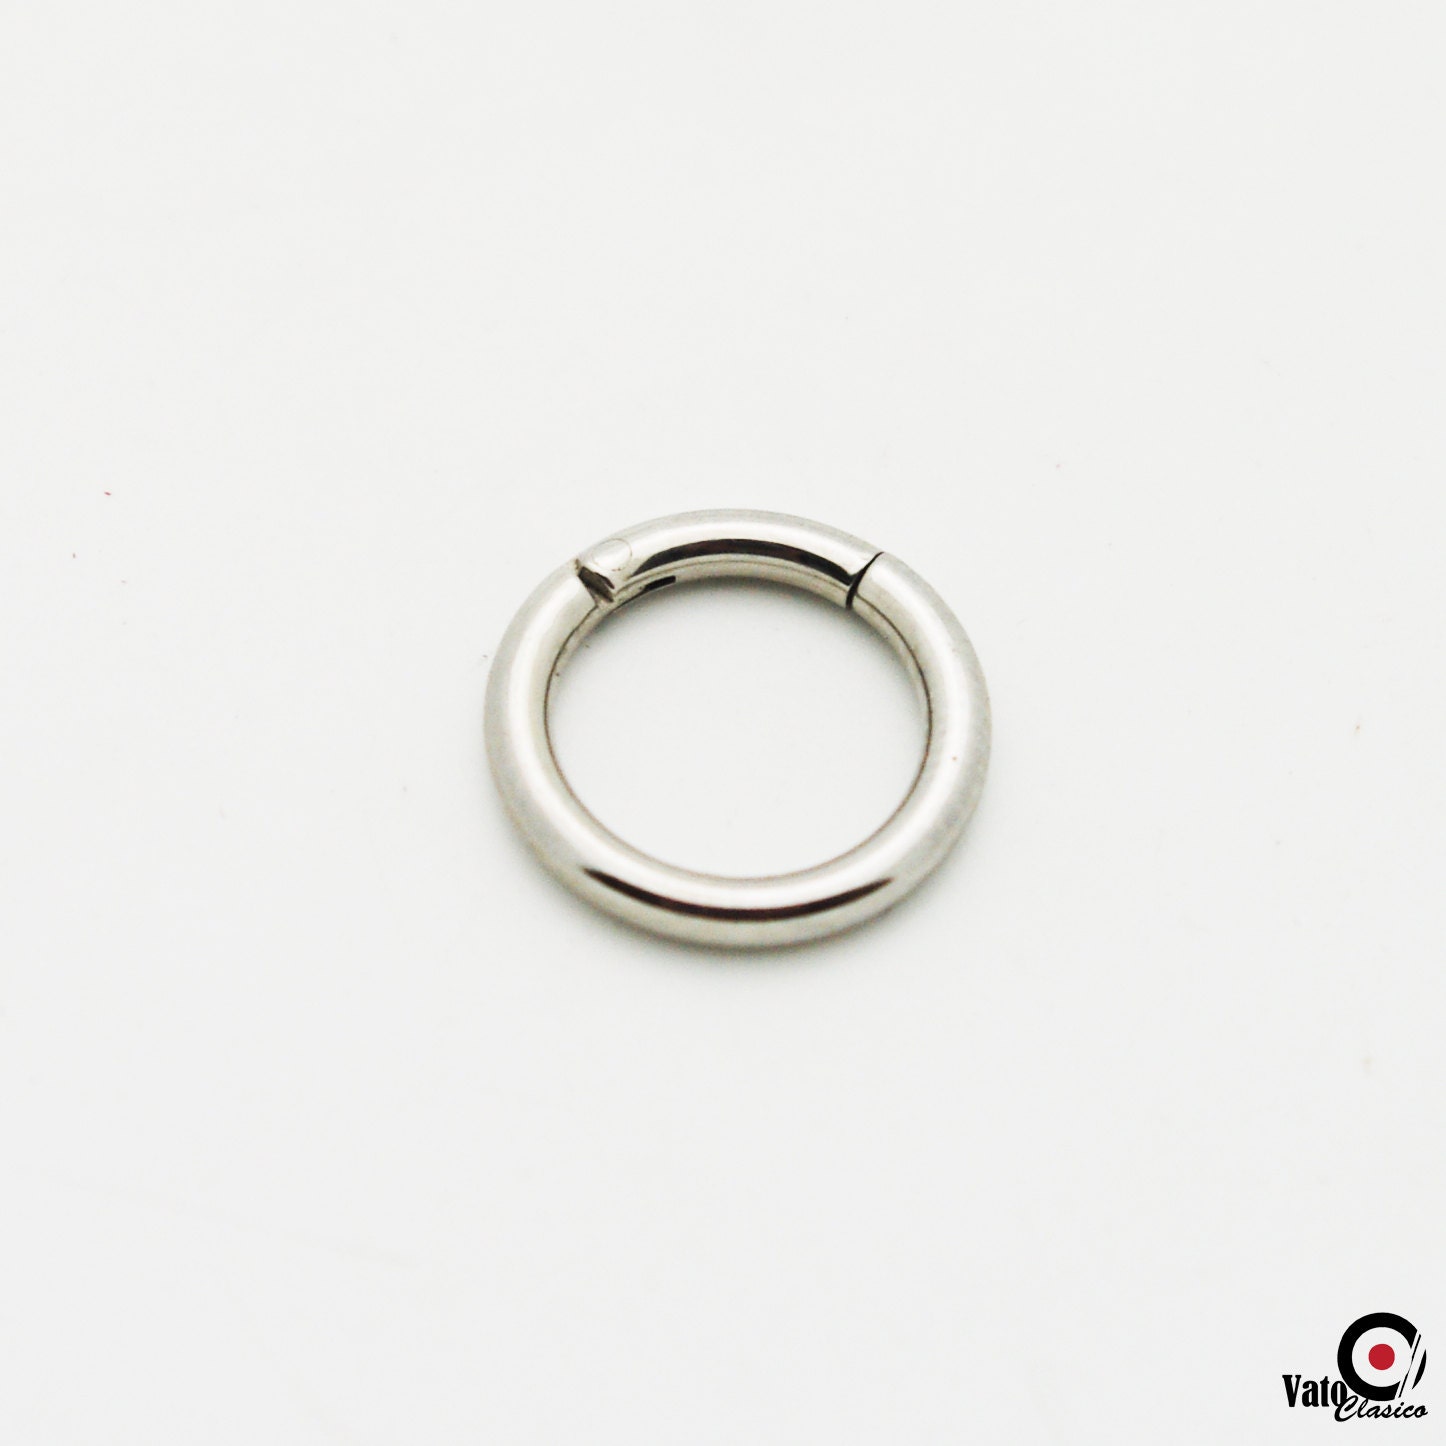 Septum Rings on 14 Gauge High Polished Steel Clicker Septum Ring By Vatoclasico